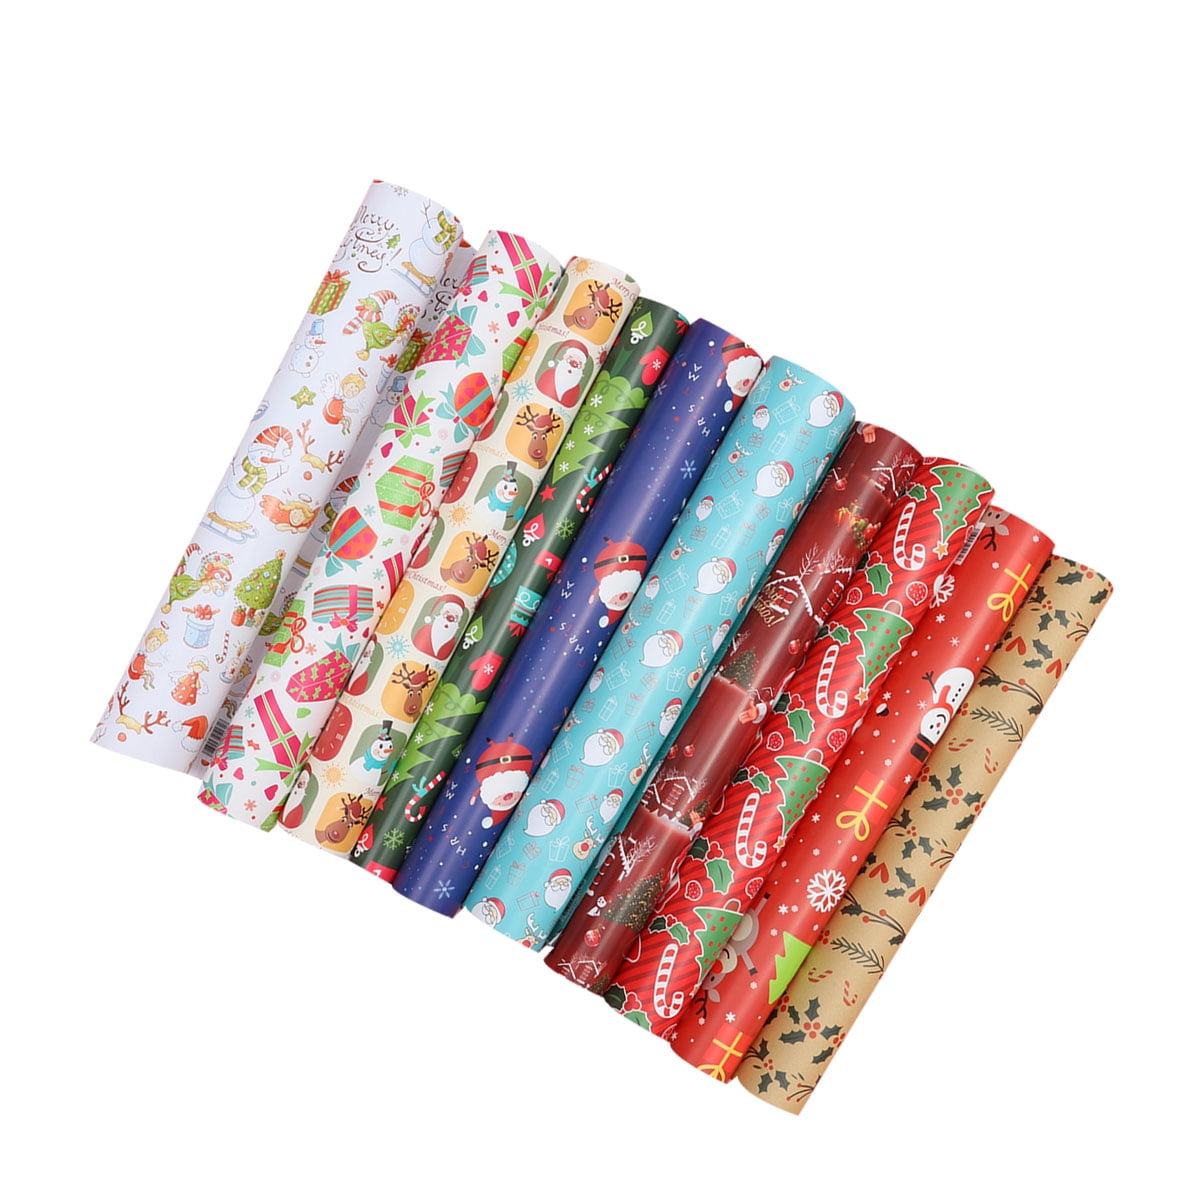 Valatala 20 Sheets Waterproof Floral Wrapping Paper Sheets Fresh Flowers  Bouquet Gift Packaging Wrapping Paper Sheets